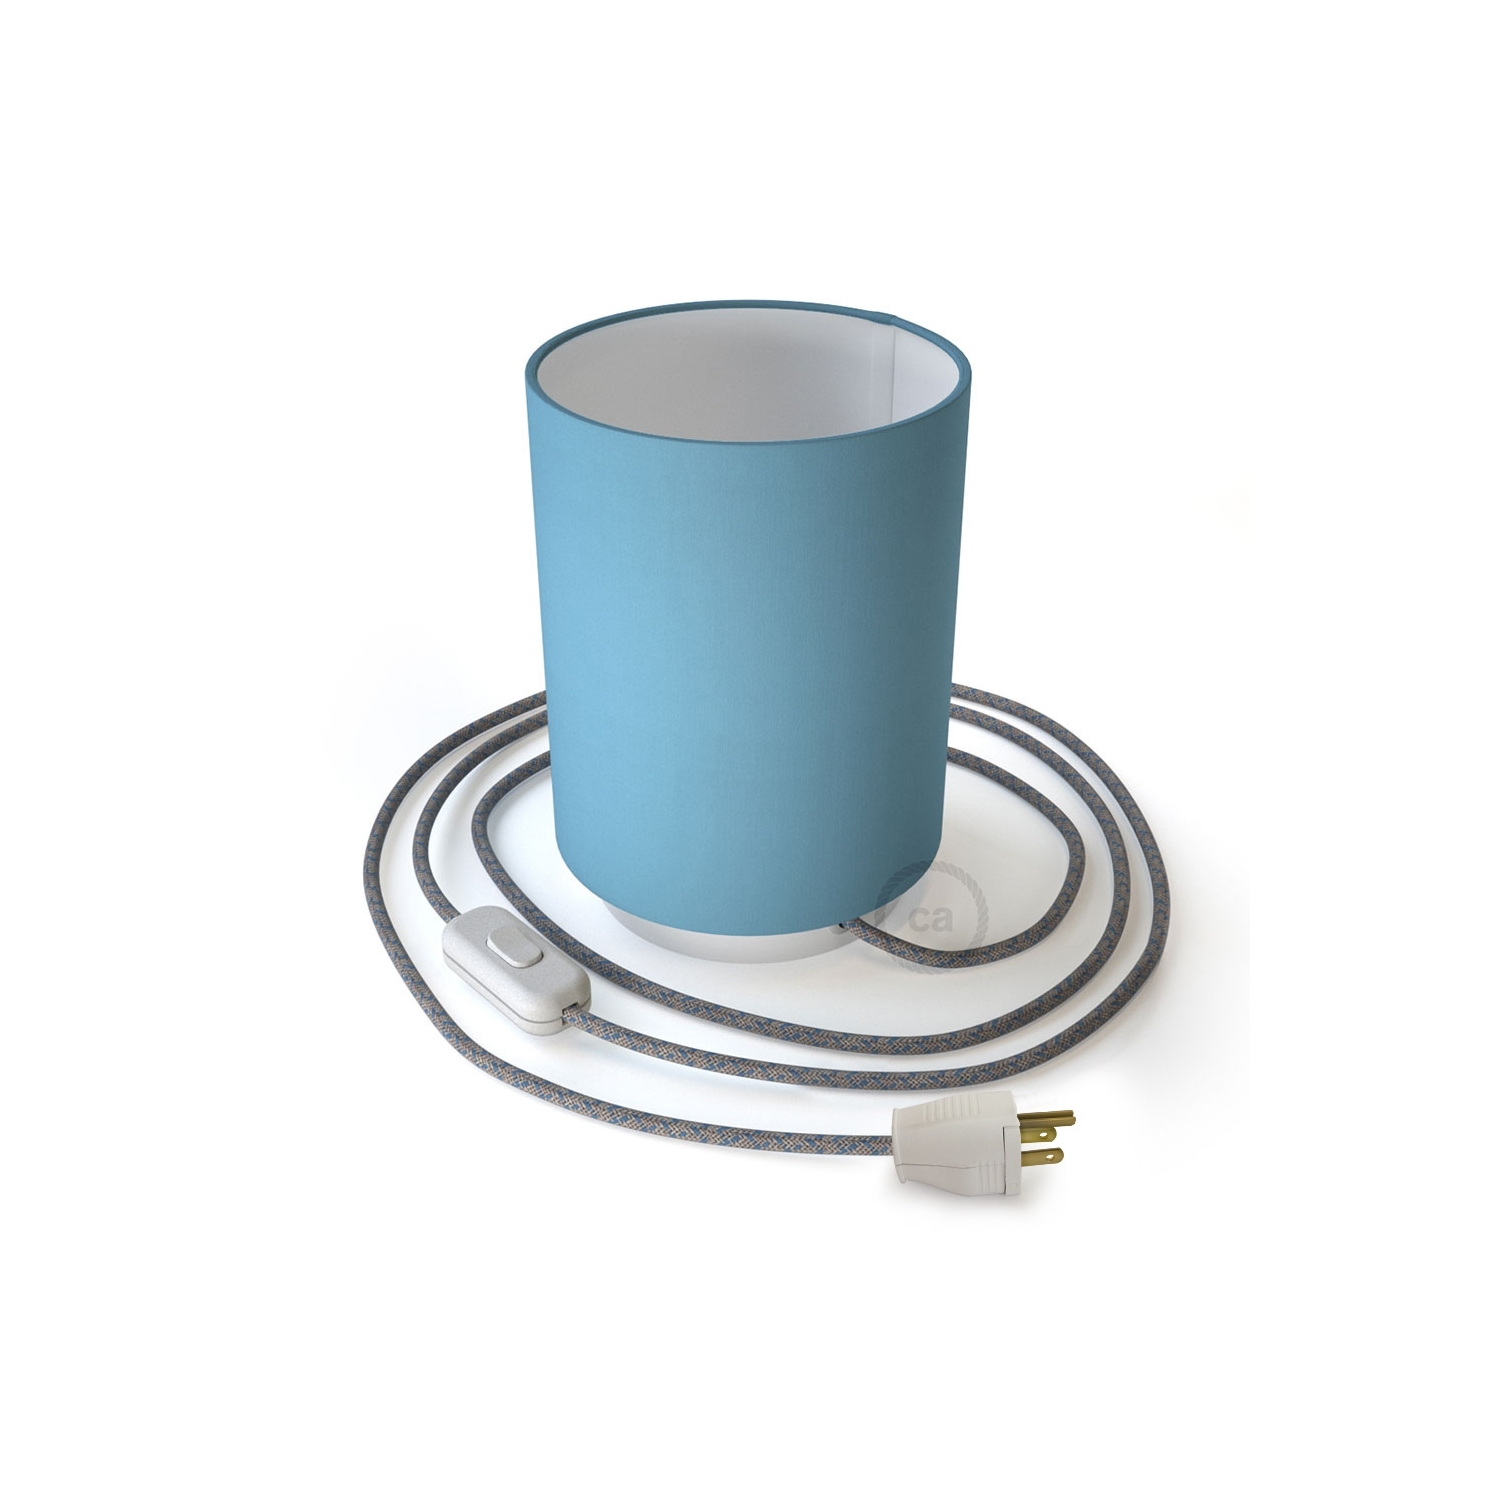 Posaluce with Blue Canvas Cylinder lampshade, white metal, with textile cable, switch and plug